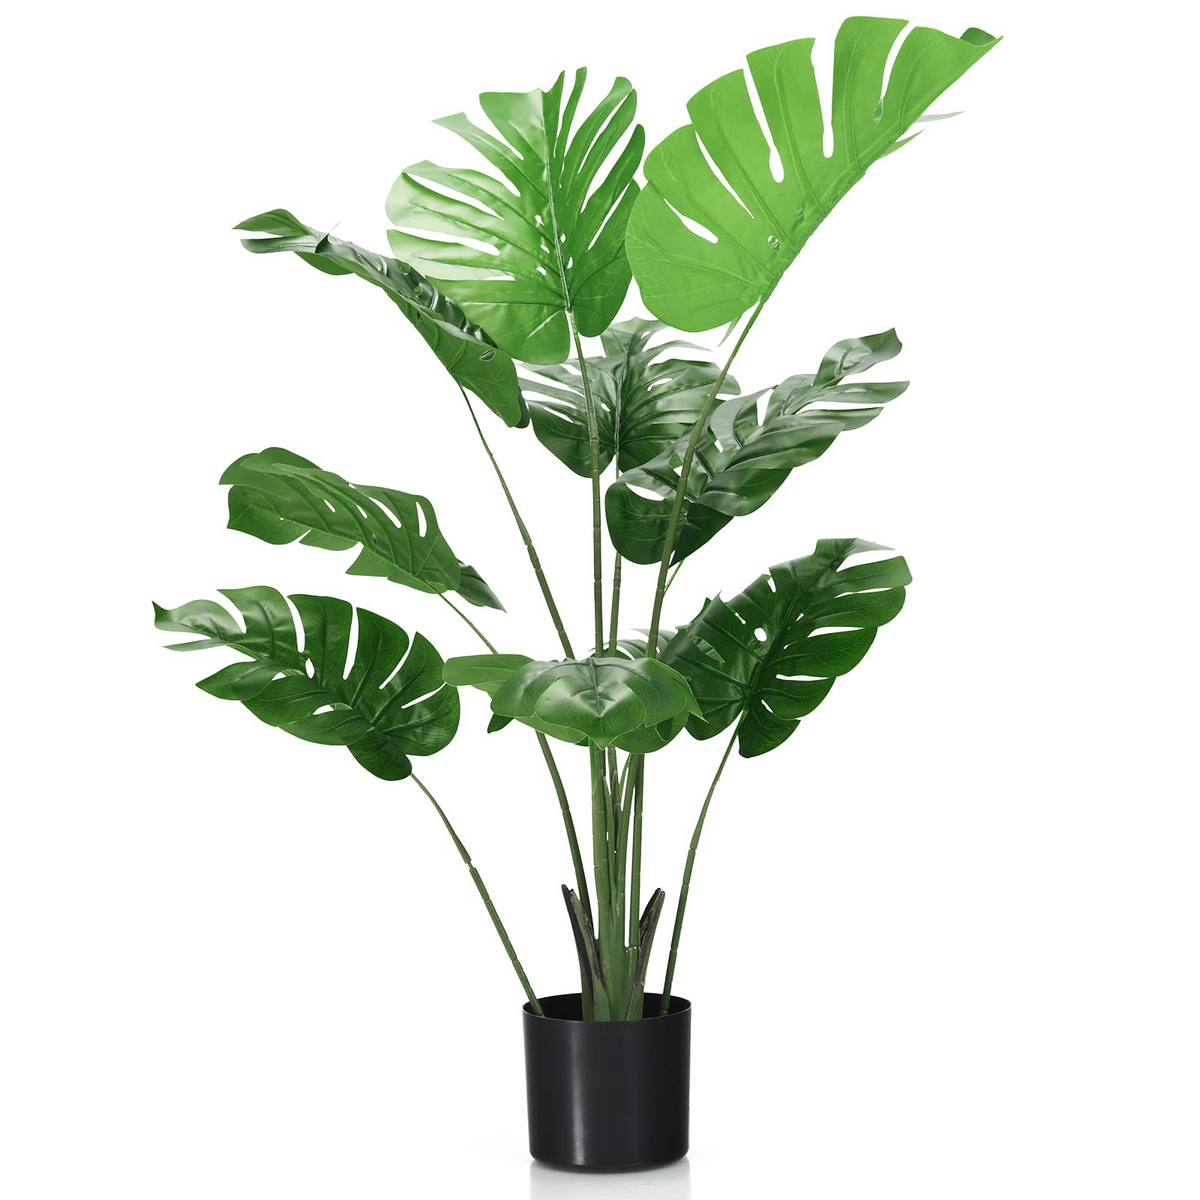 Goplus Artificial Monstera Deliciosa Plant, 4ft Tall Fake Tropical Palm Tree w/10 Pcs Different Turtle Leaves - GoplusUS